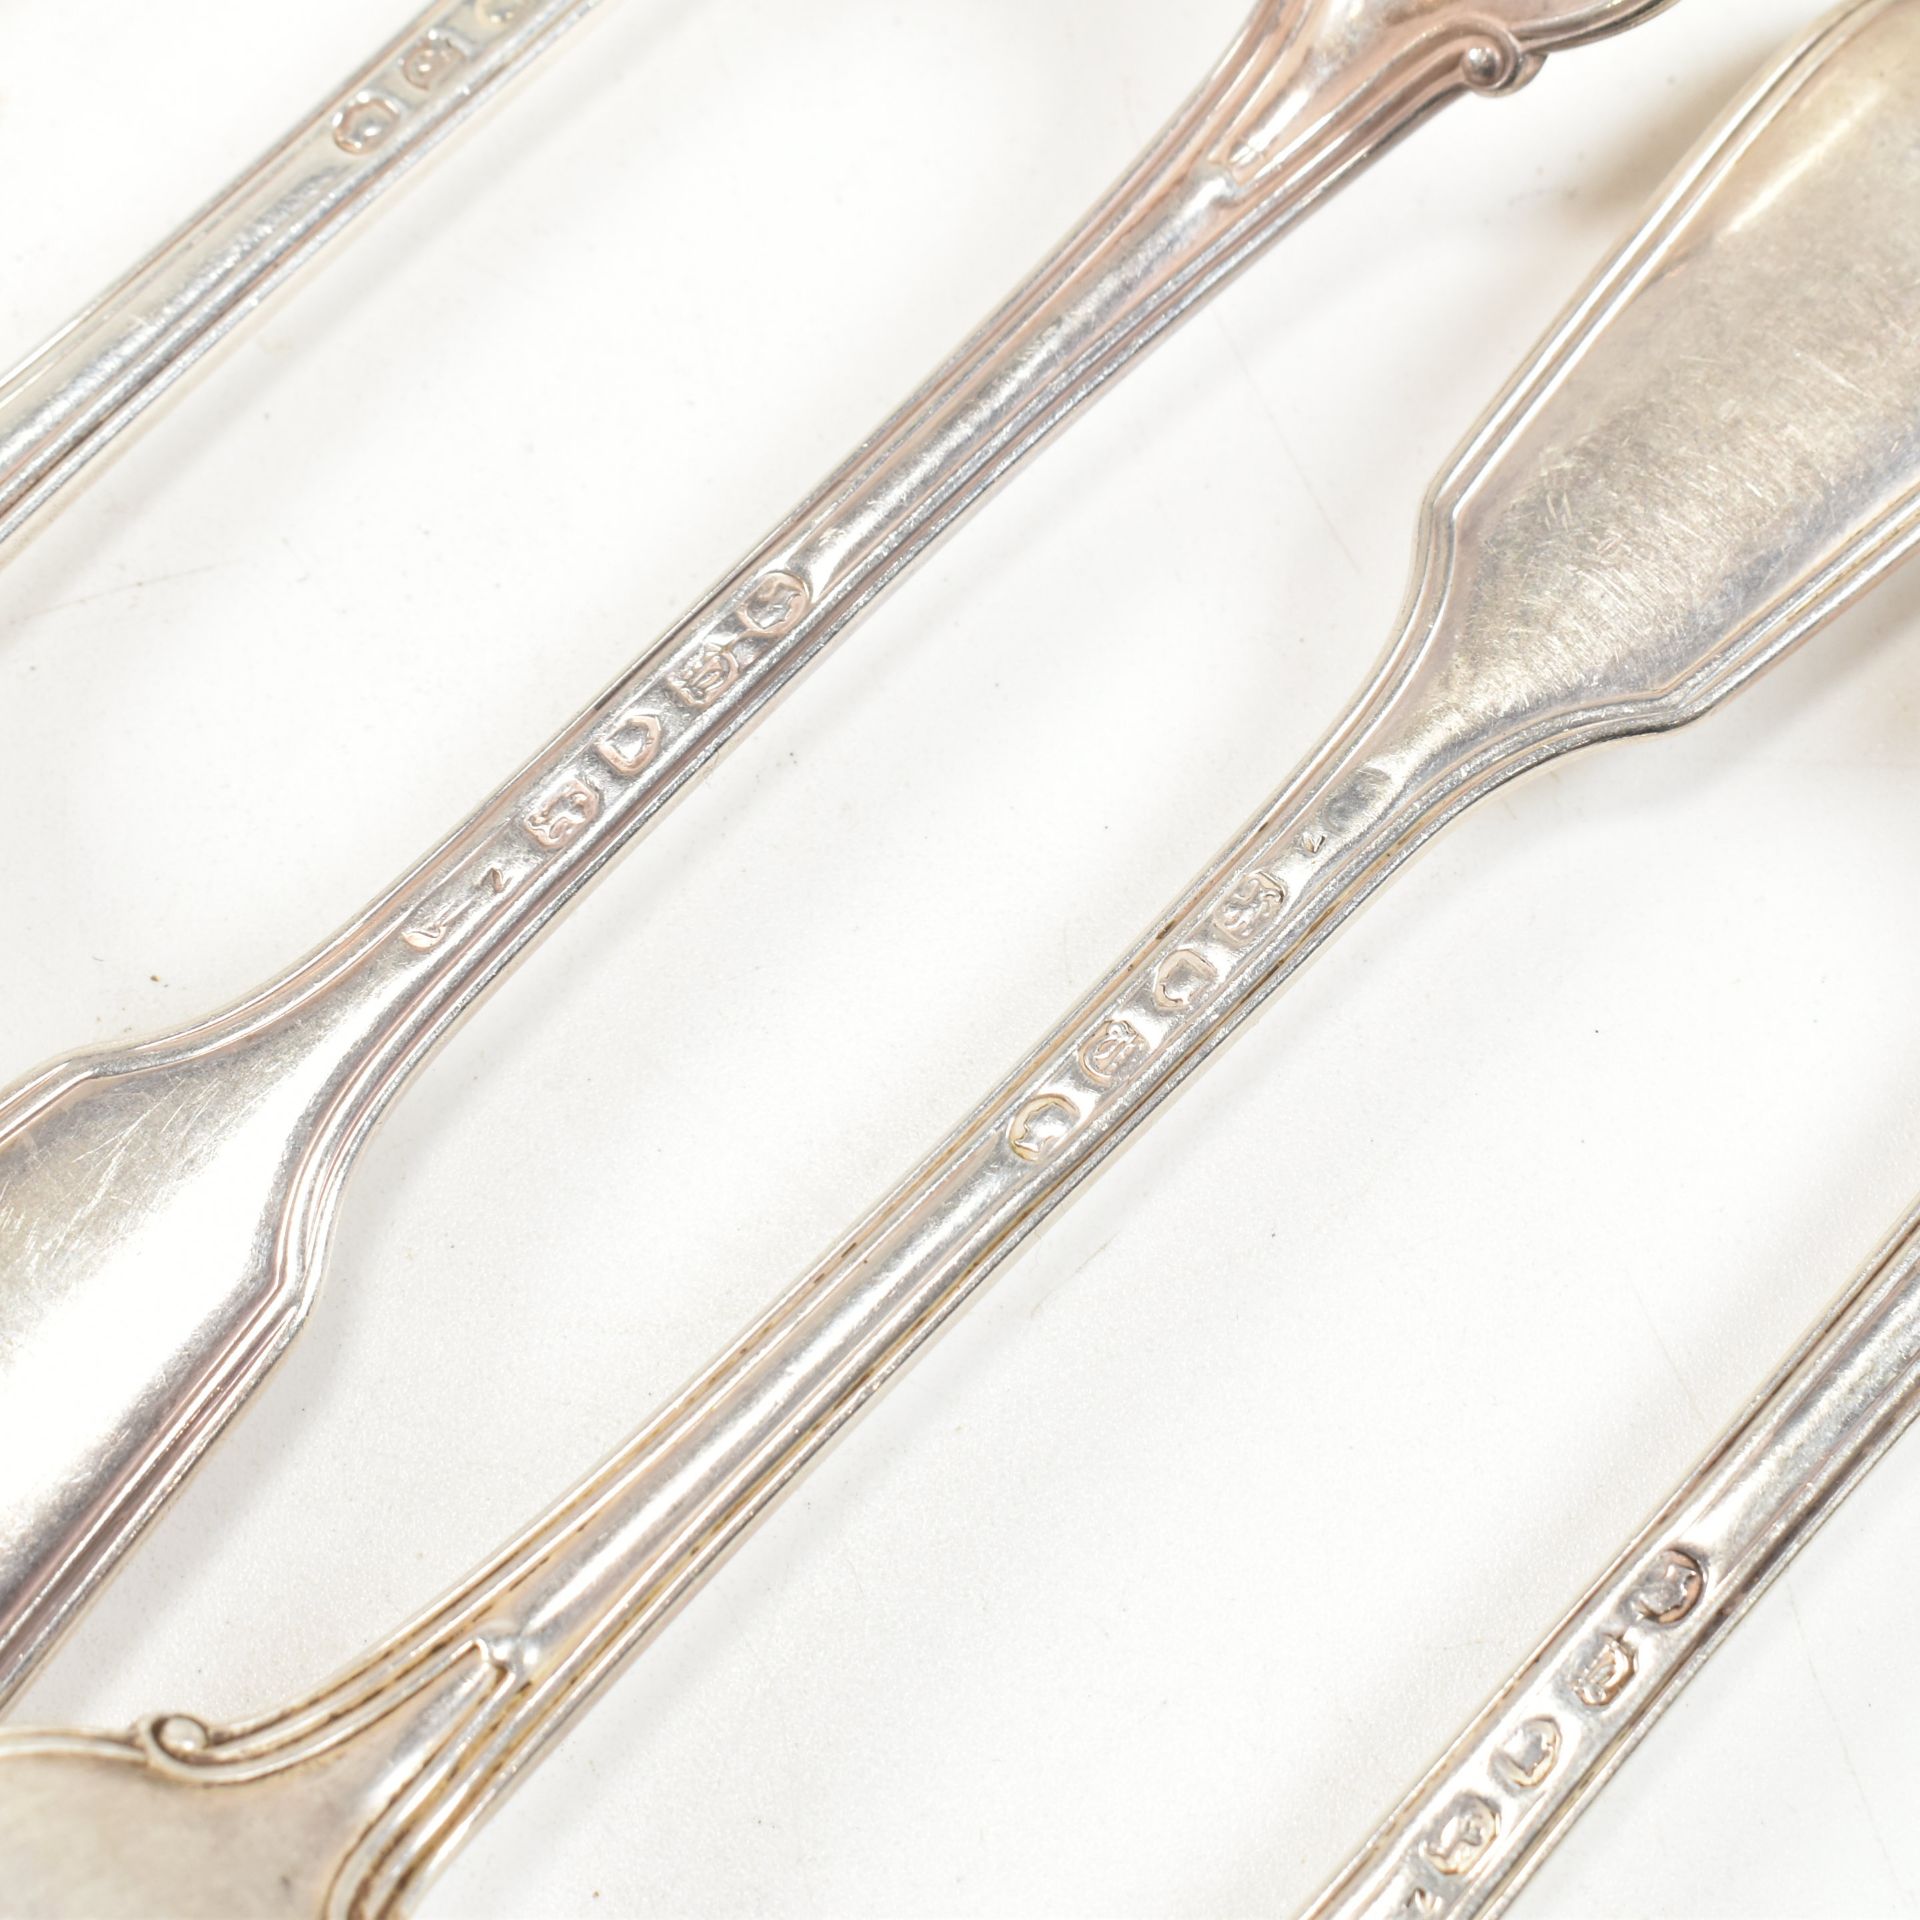 6 VICTORIAN HALLMARKED SILVER FORKS - Image 5 of 6